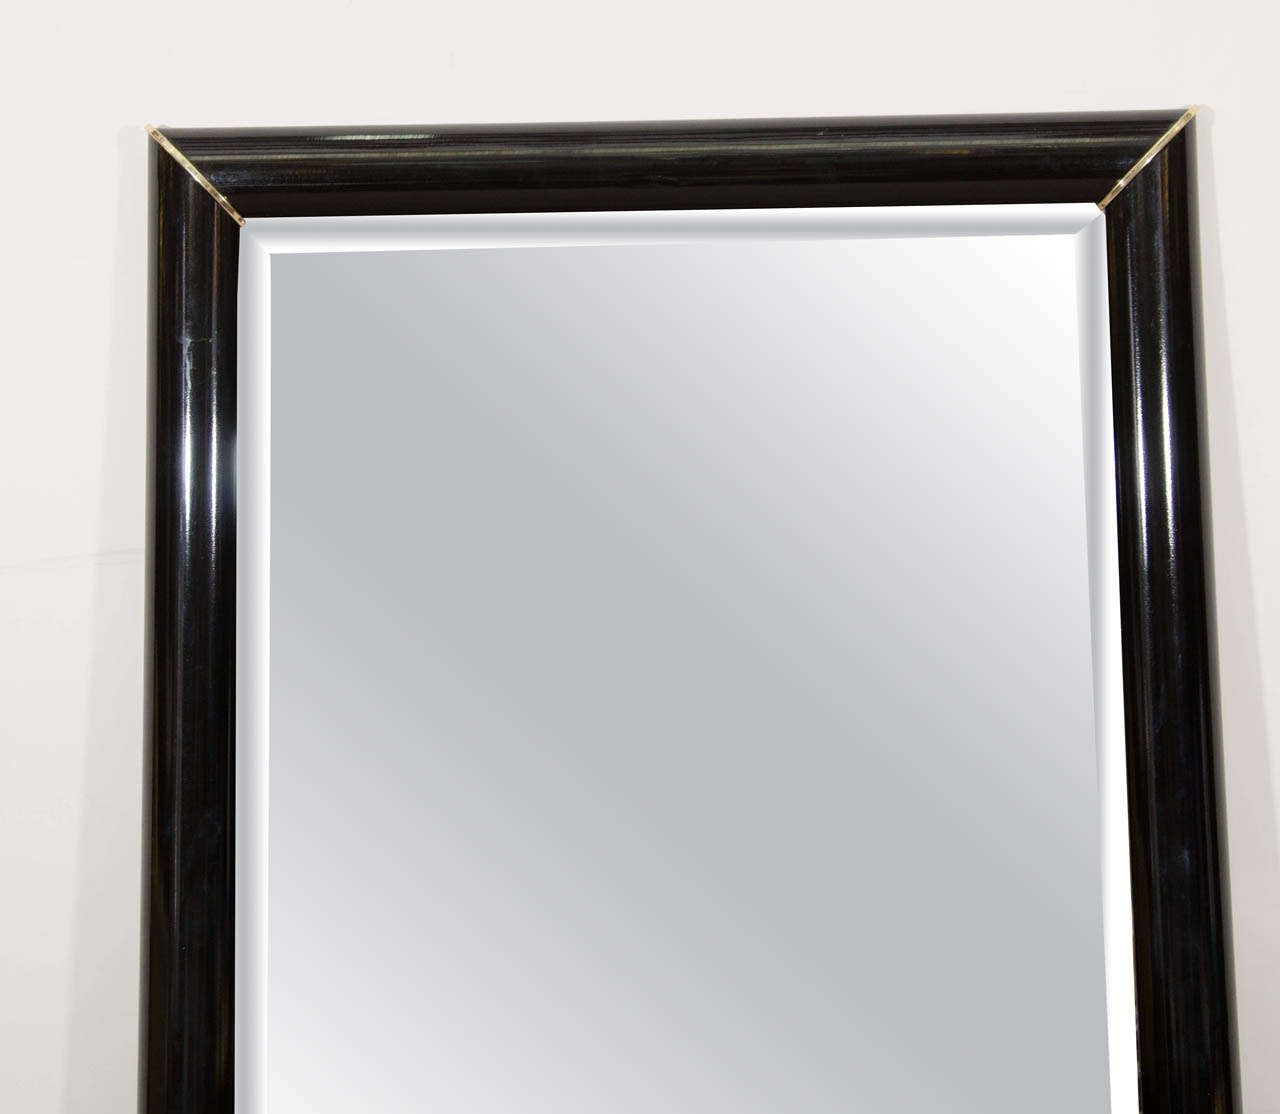 Black Lacquered Wall Mirror With Gold Corner Accents At 1stdibs Regarding Newest Cut Corner Wall Mirrors (View 2 of 15)